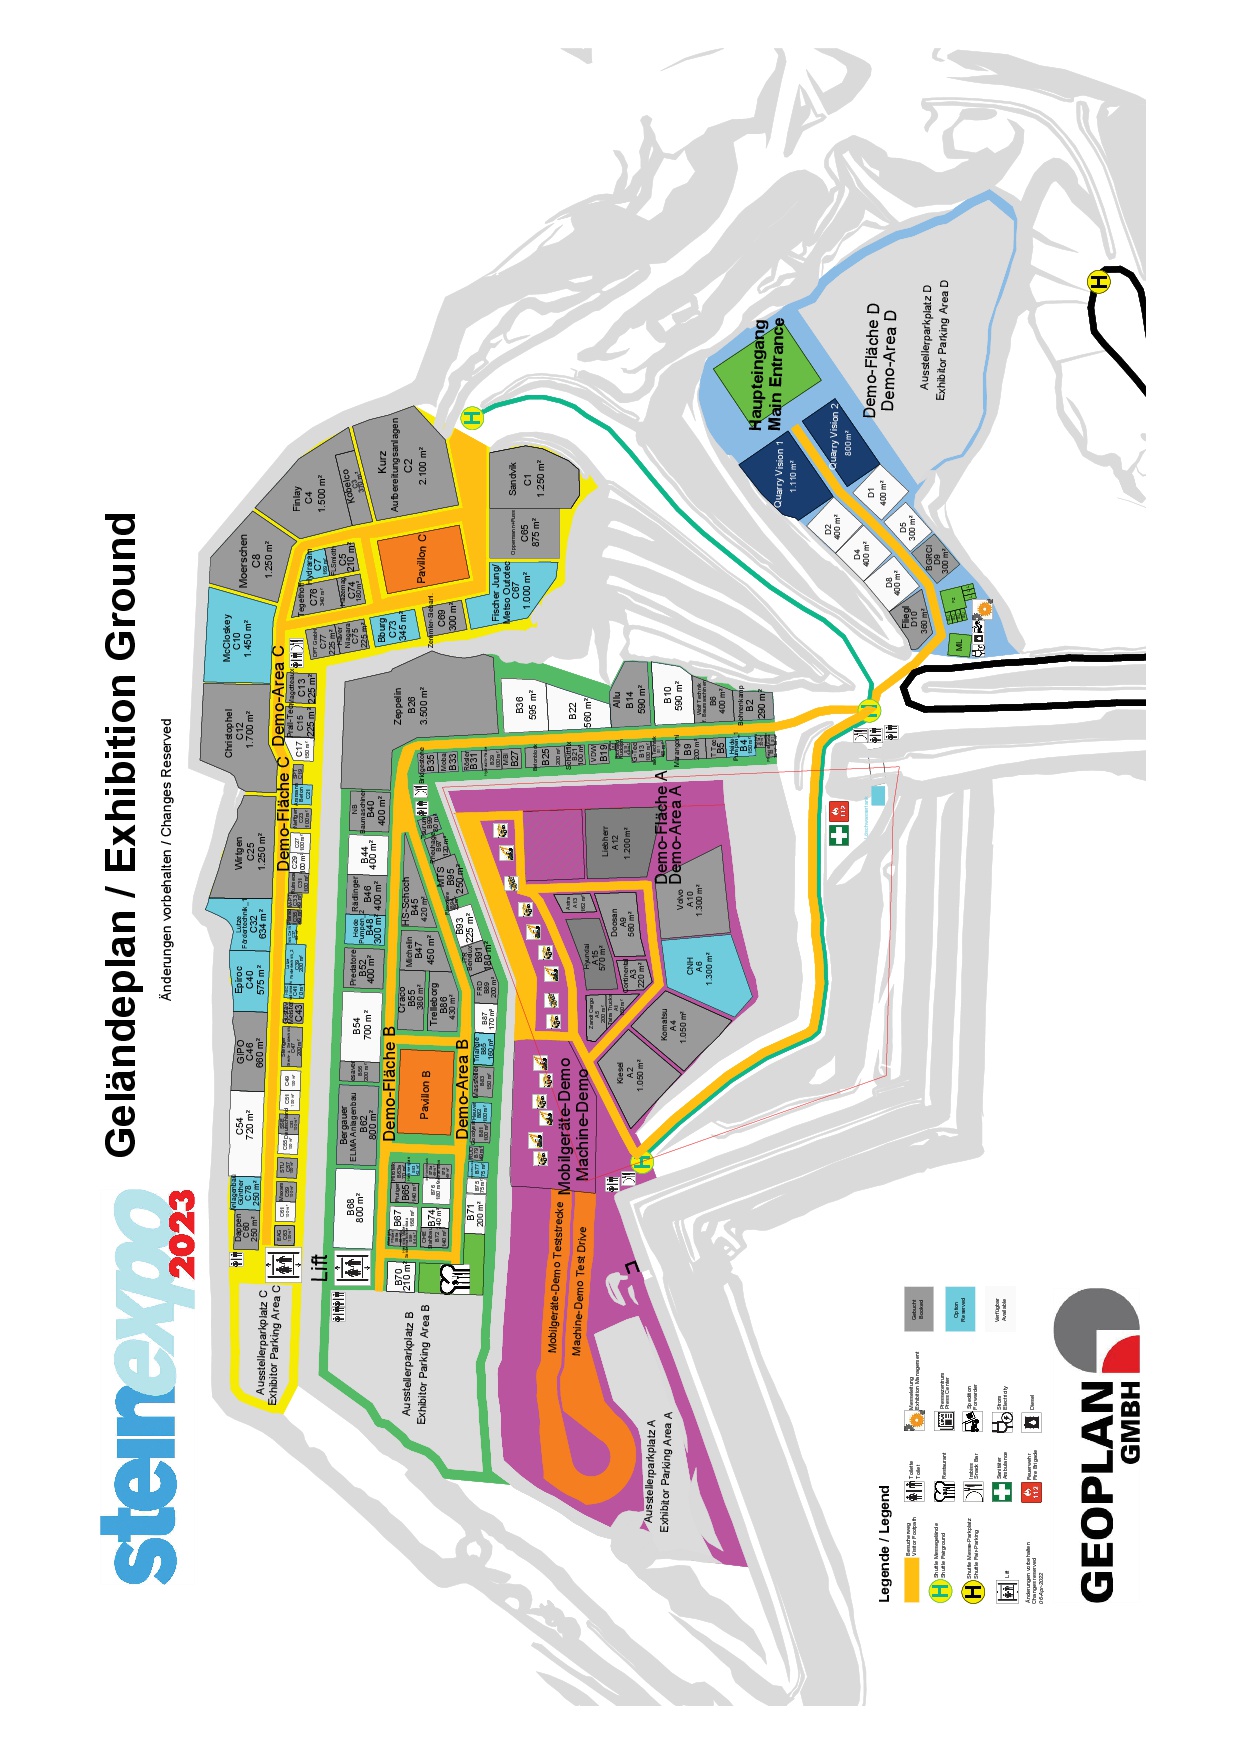 The site-plan for steinexpo 2023. Source: Geoplan